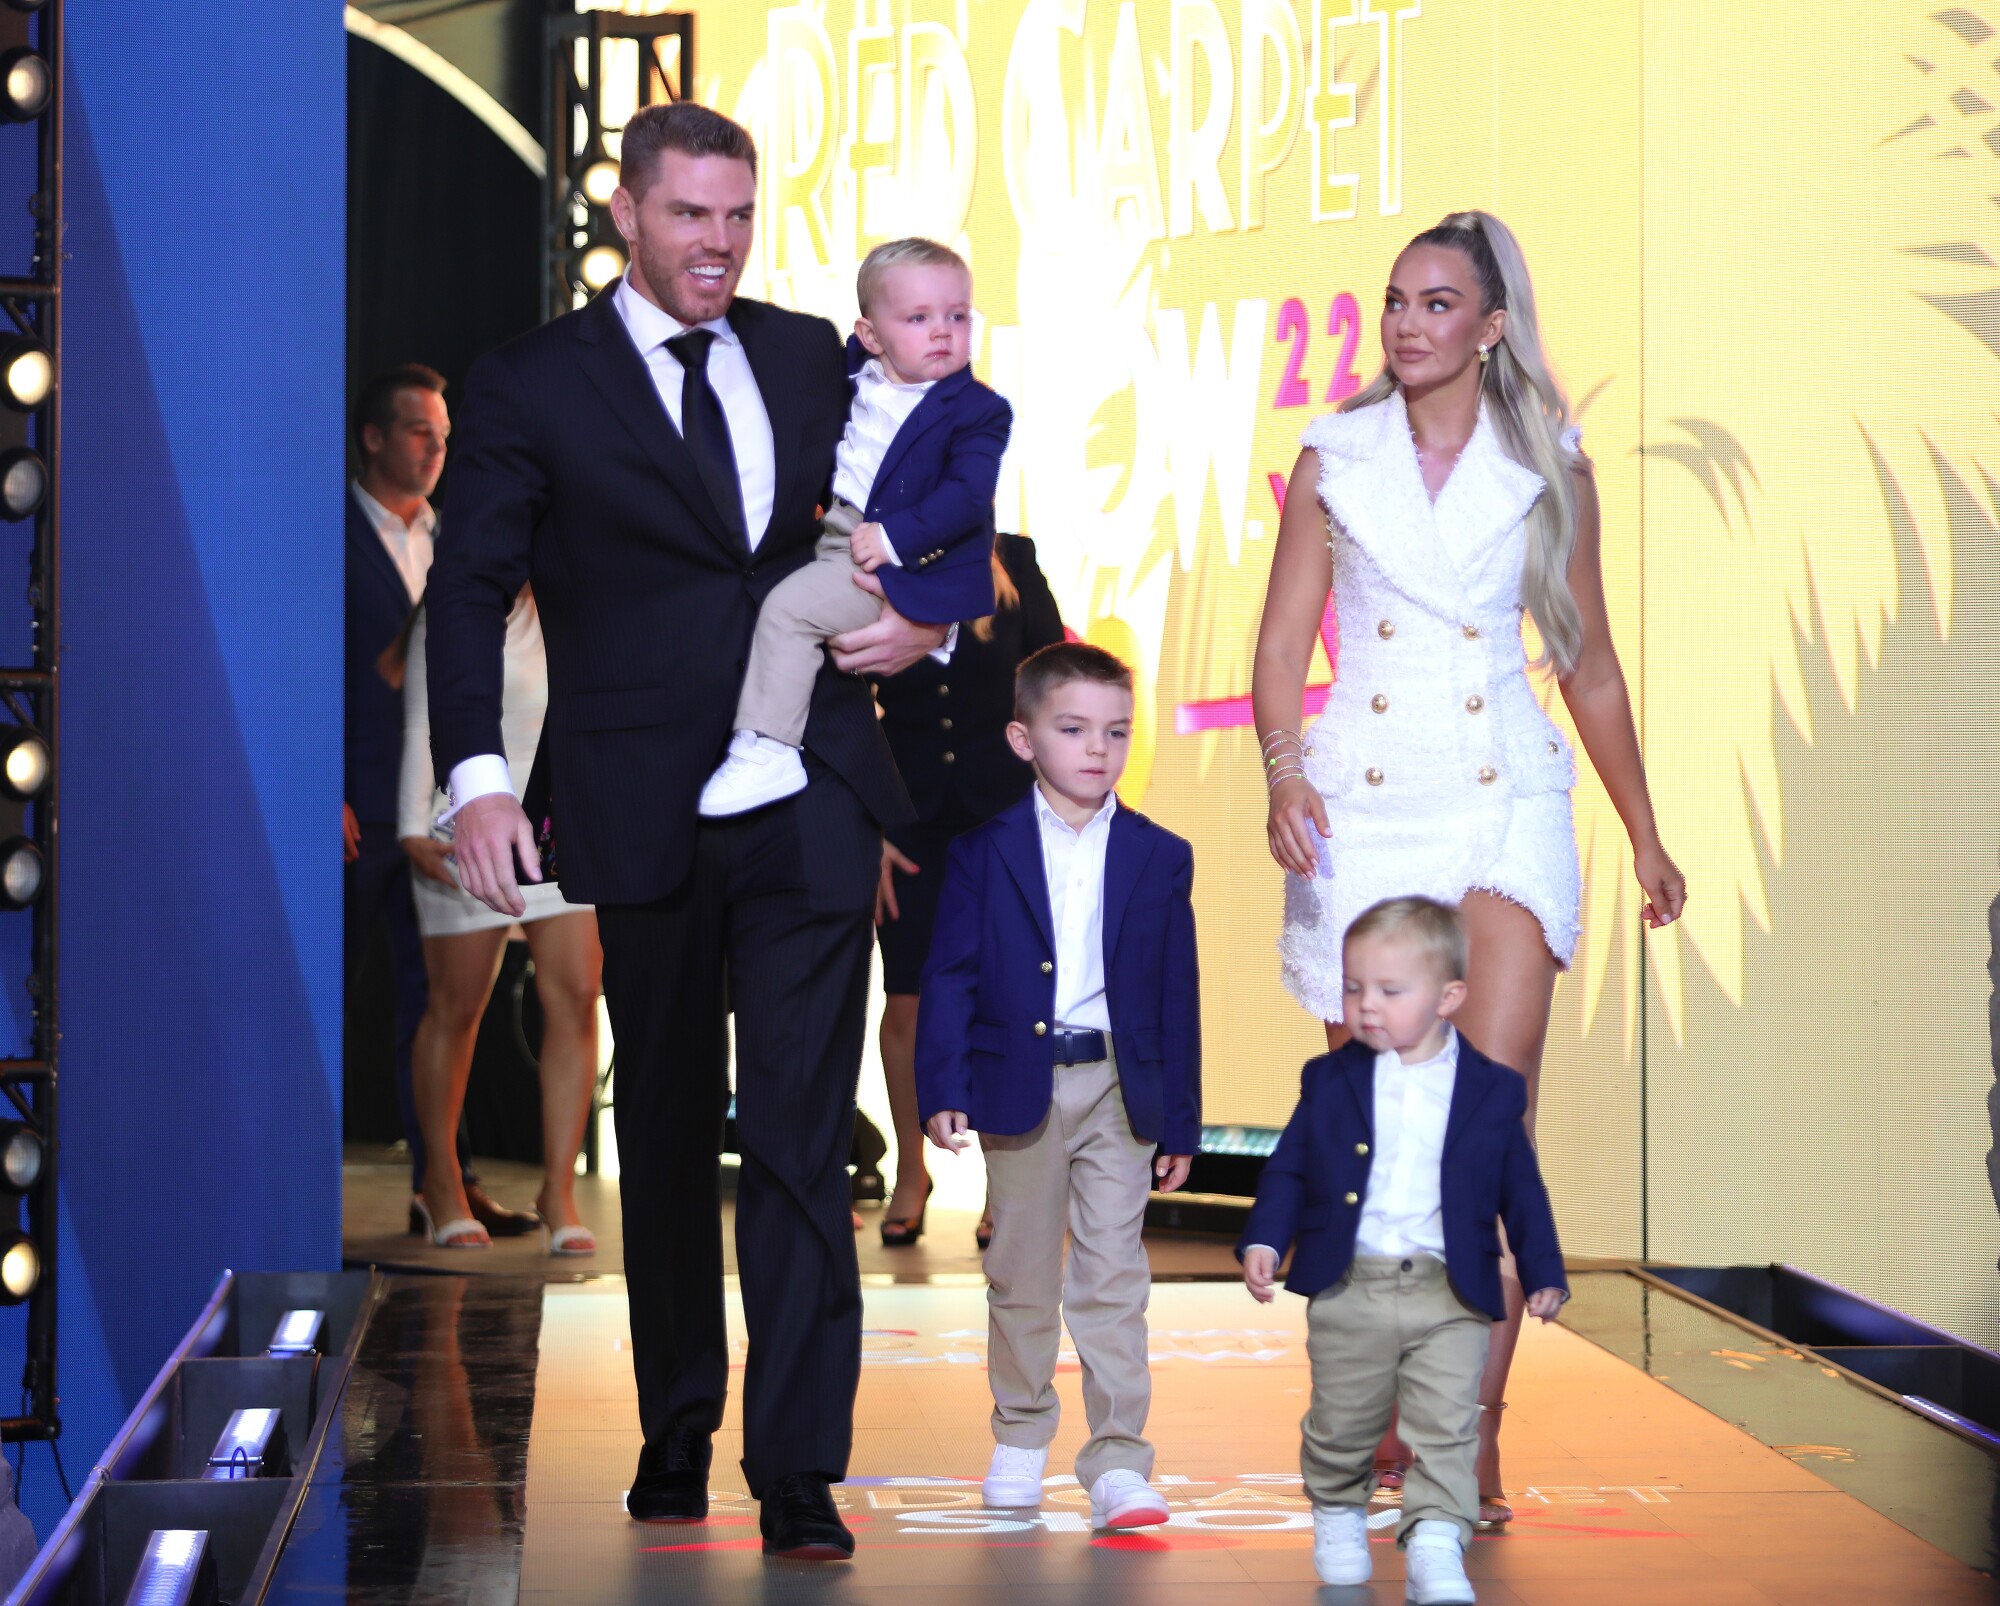 Dodgers first baseman Freddie Freeman arrives with his family at the 2022 MLB All-Star Game Red Carpet Show.